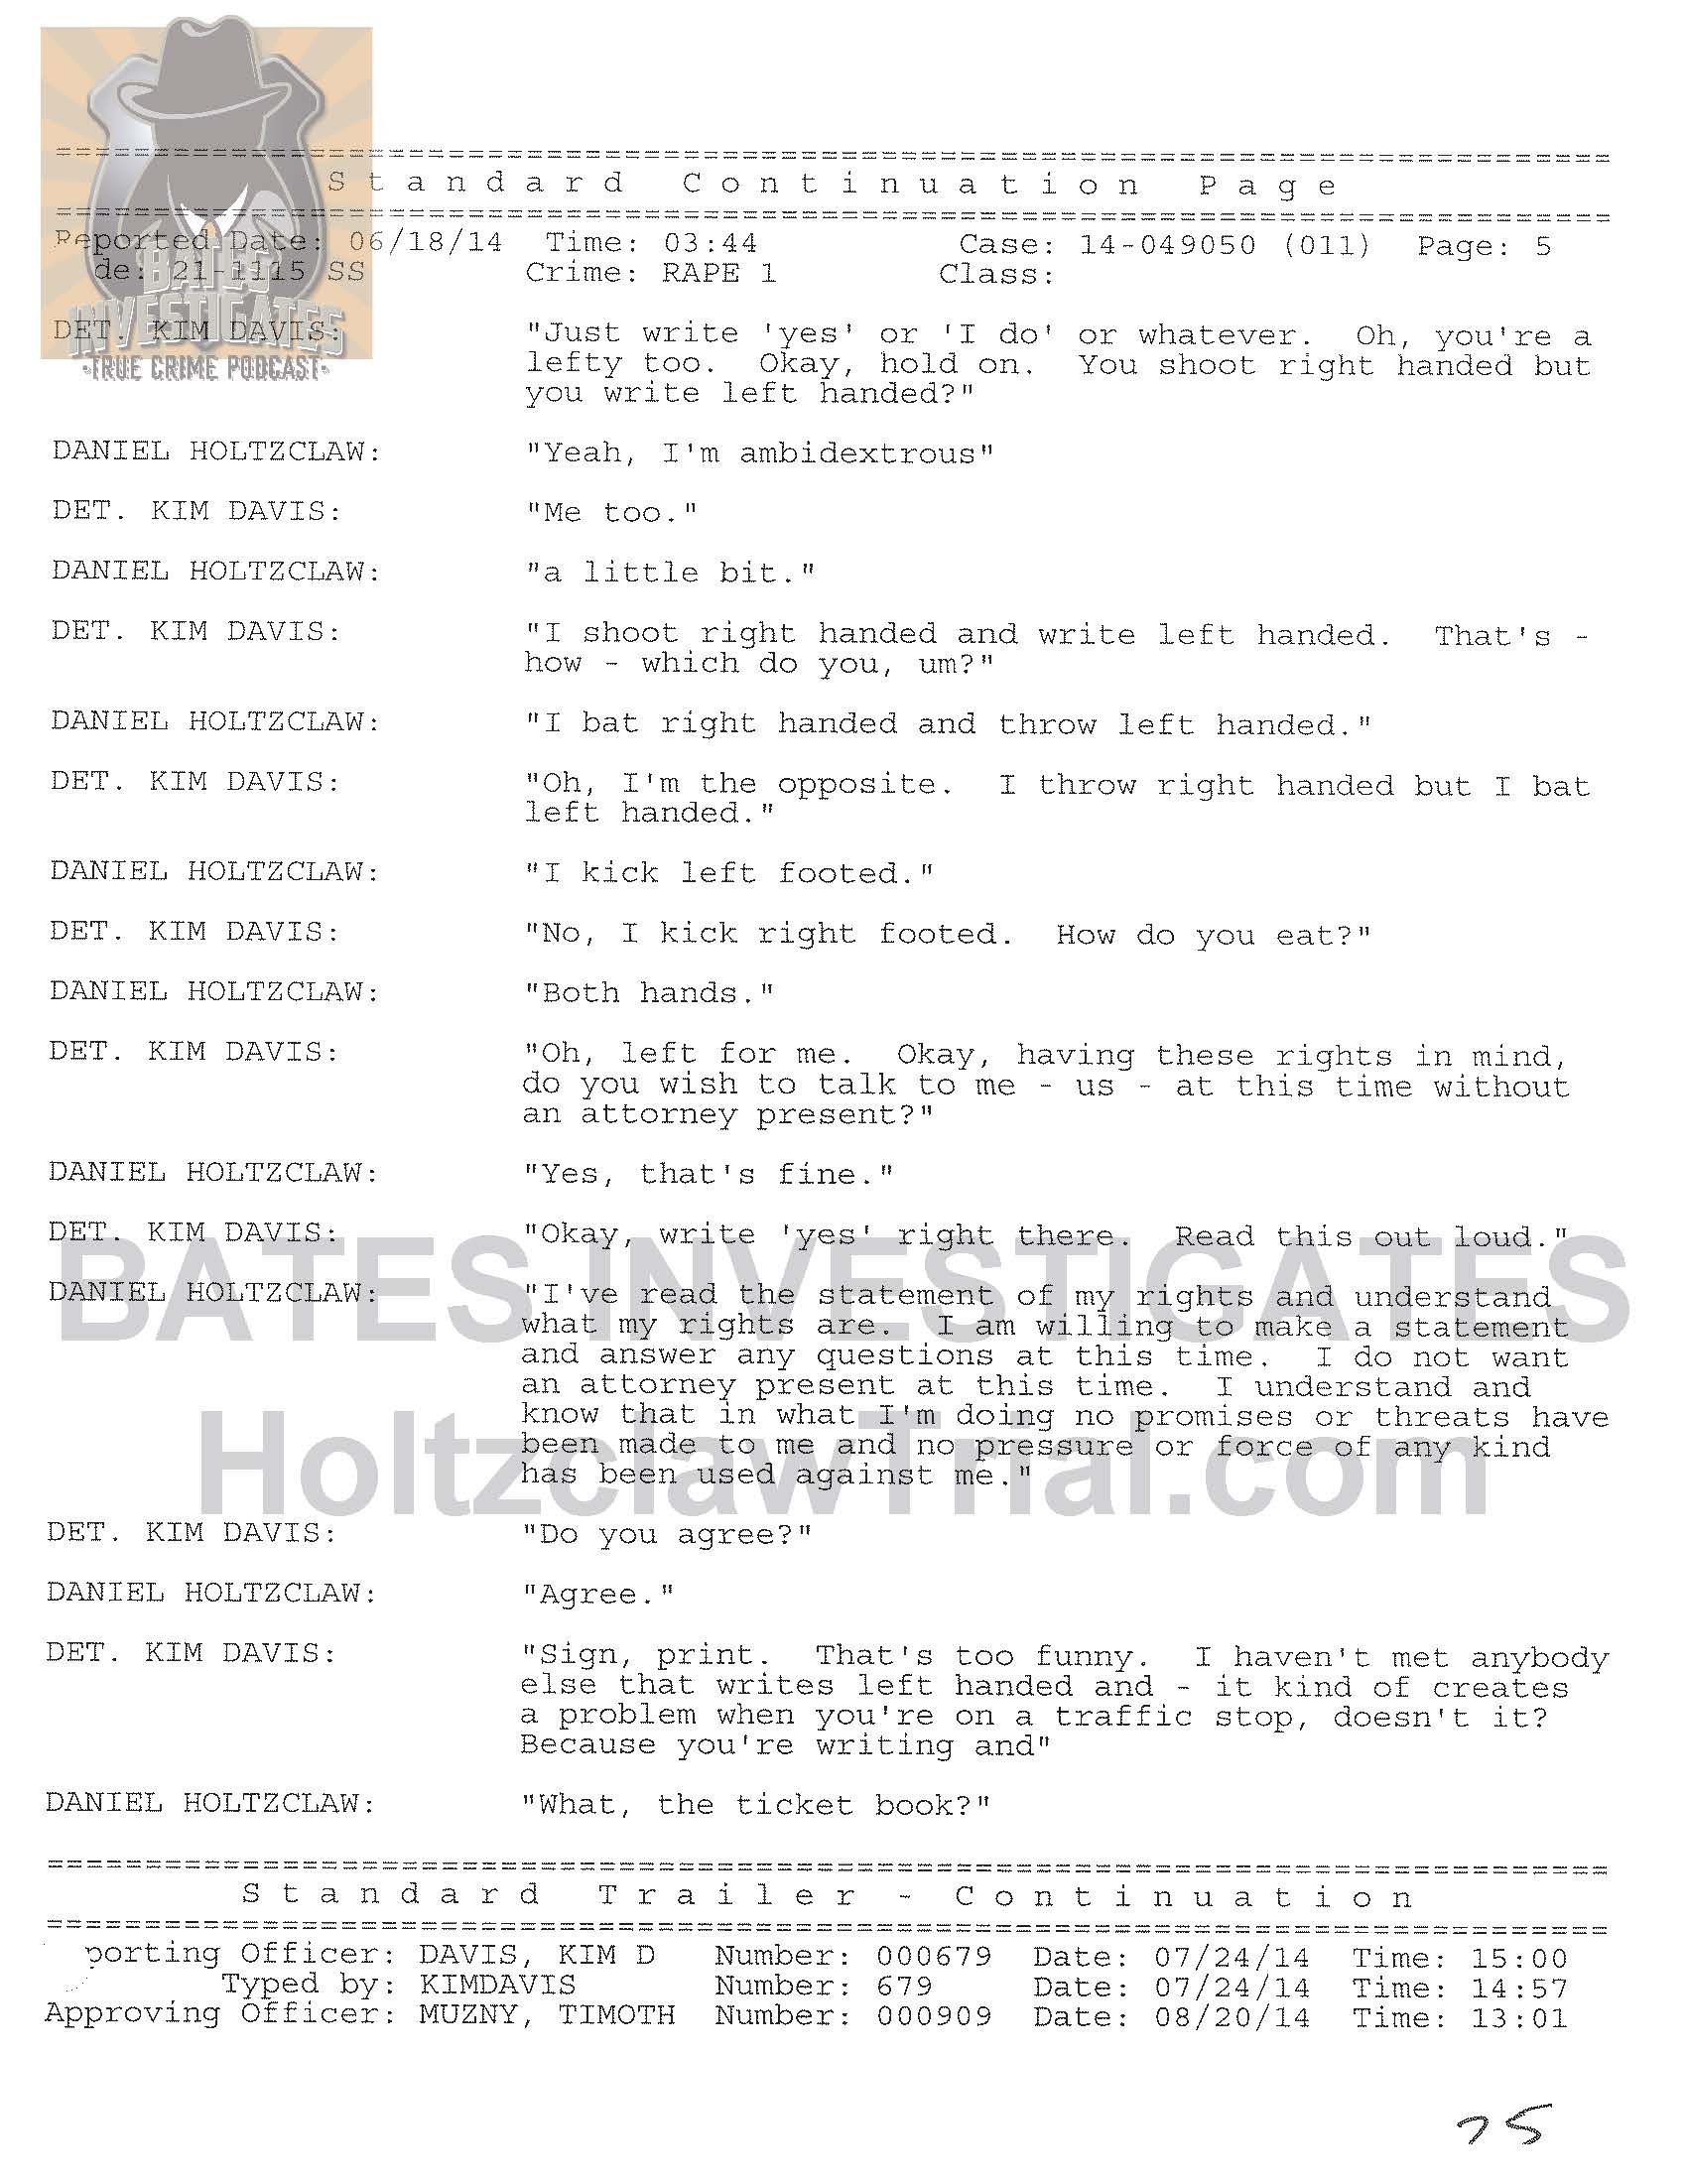 Holtzclaw Interrogation Transcript - Ep02 Redacted_Page_05.jpg